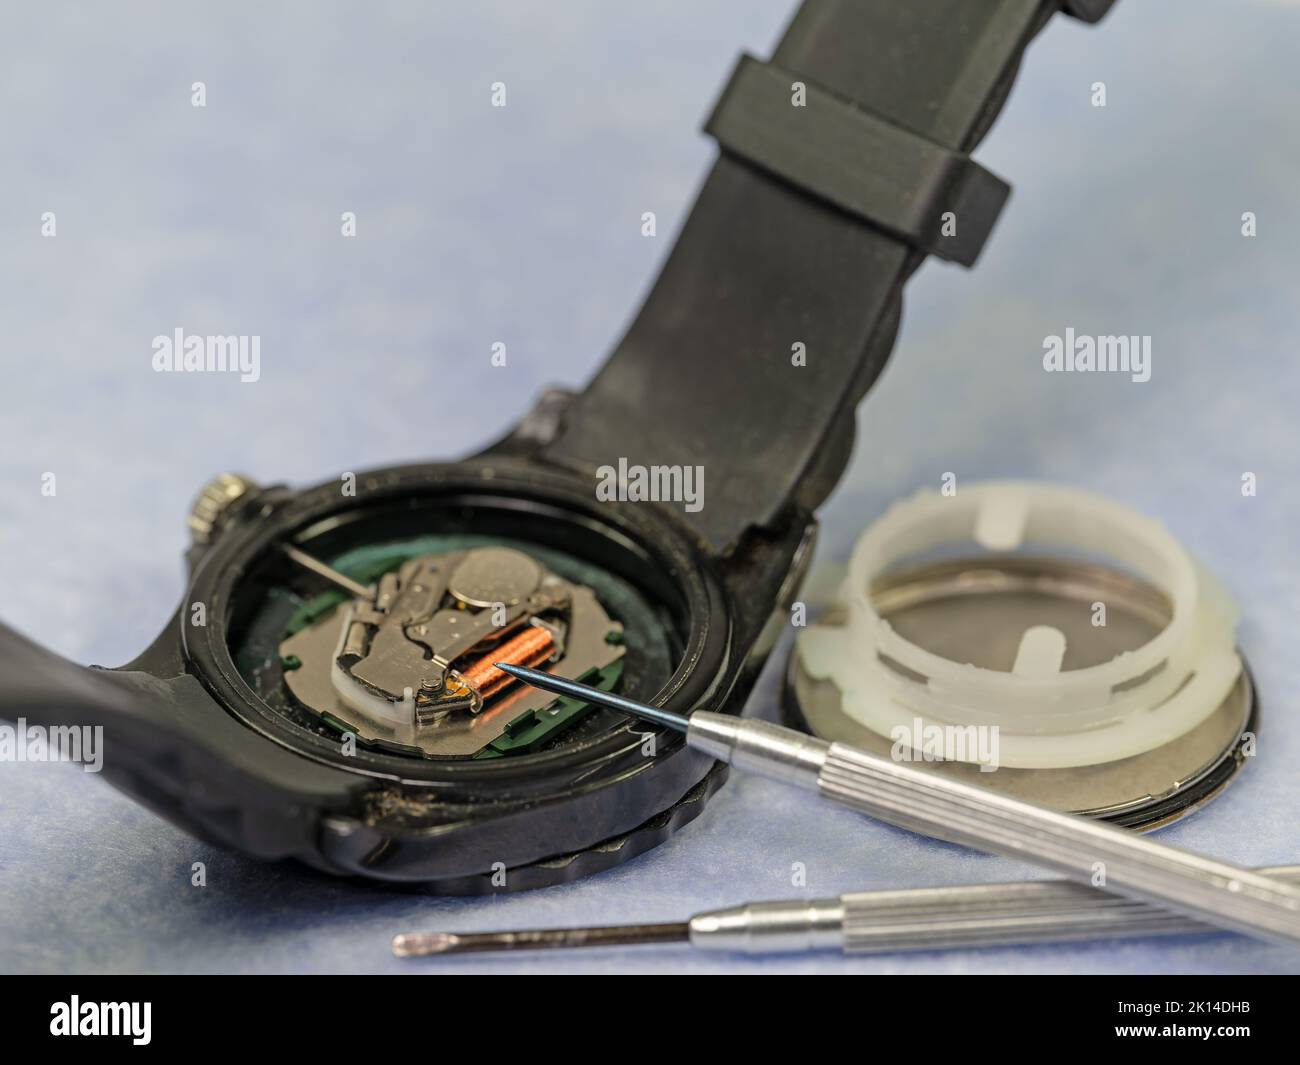 Open wristwatch shows its inner workings Stock Photo